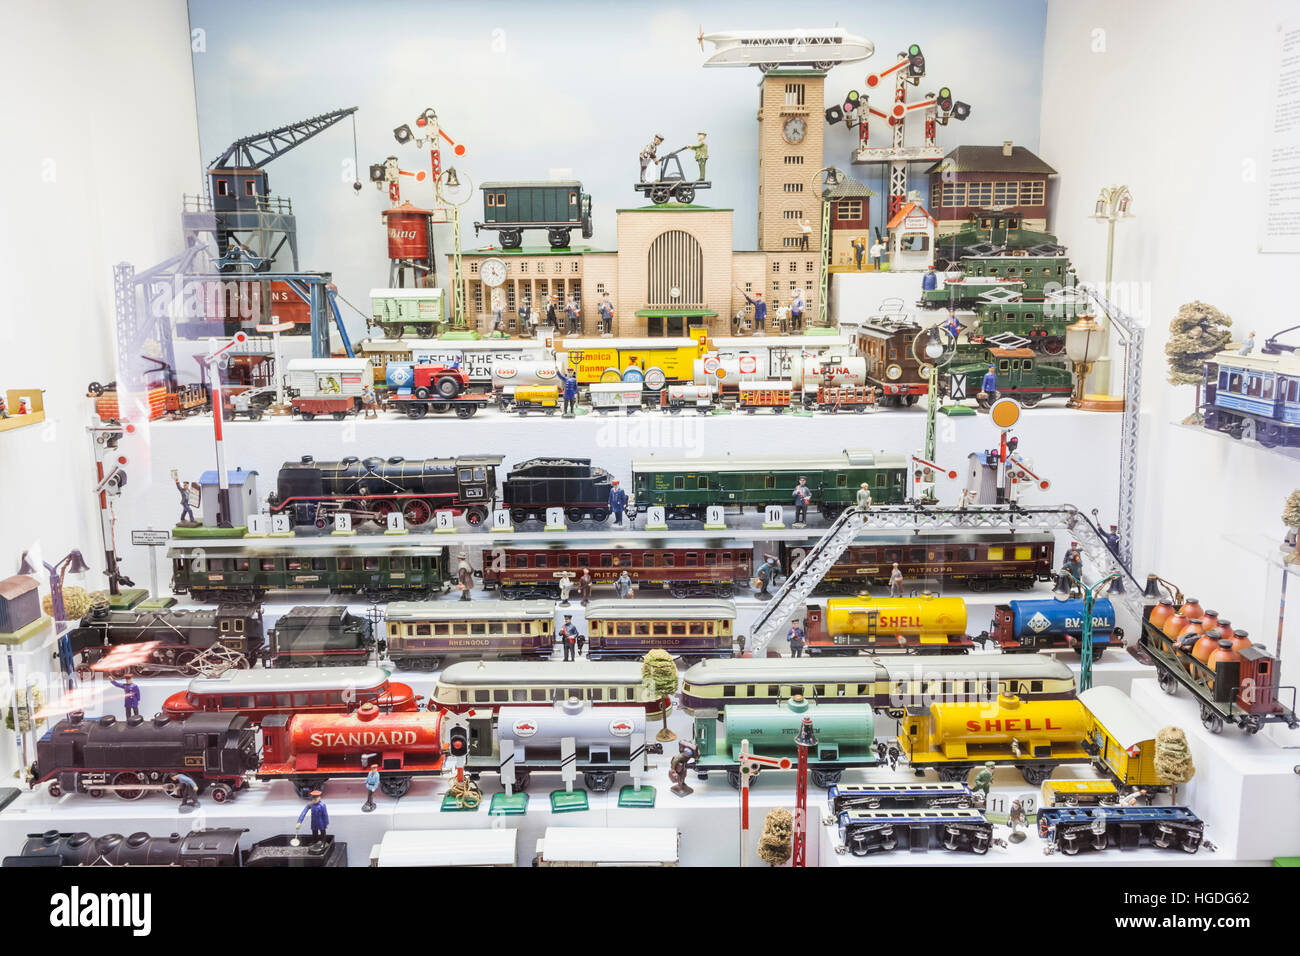 Germany, Bavaria, Munich, Marienplatz, Old Town Hall, The Toy and Teddy Museum (Spielzeugmuseum), Exhibit of Vintage Train Sets Stock Photo